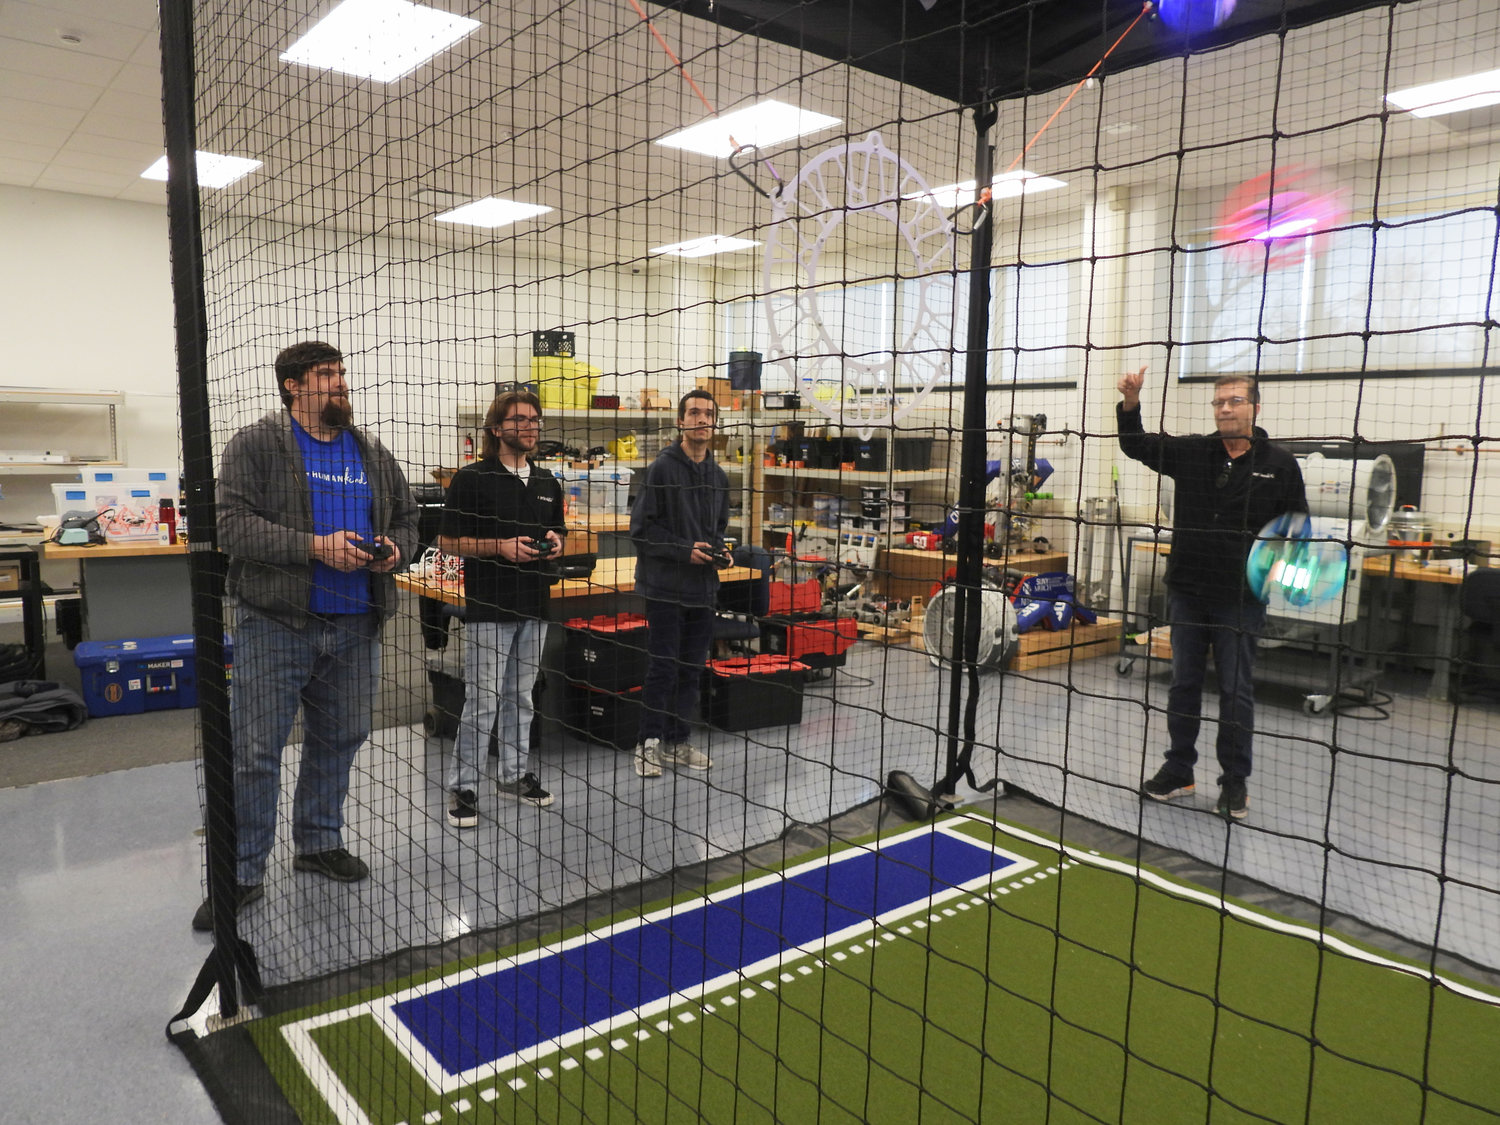 A practice match is held at SUNY Polytechnic with CNY Drones. Pictured Left to Right: John Franklin, student at SUNY Poly, CNY Drones member Gaetano Viti, Edwin Martinez-Vazquez, student at SUNY Poly and member of the AMA Drone Student Club, Robert Payne, co-founder of CNY Drones and adjunct instructor in the mechanical engineering technology department at SUNY Polytechnic